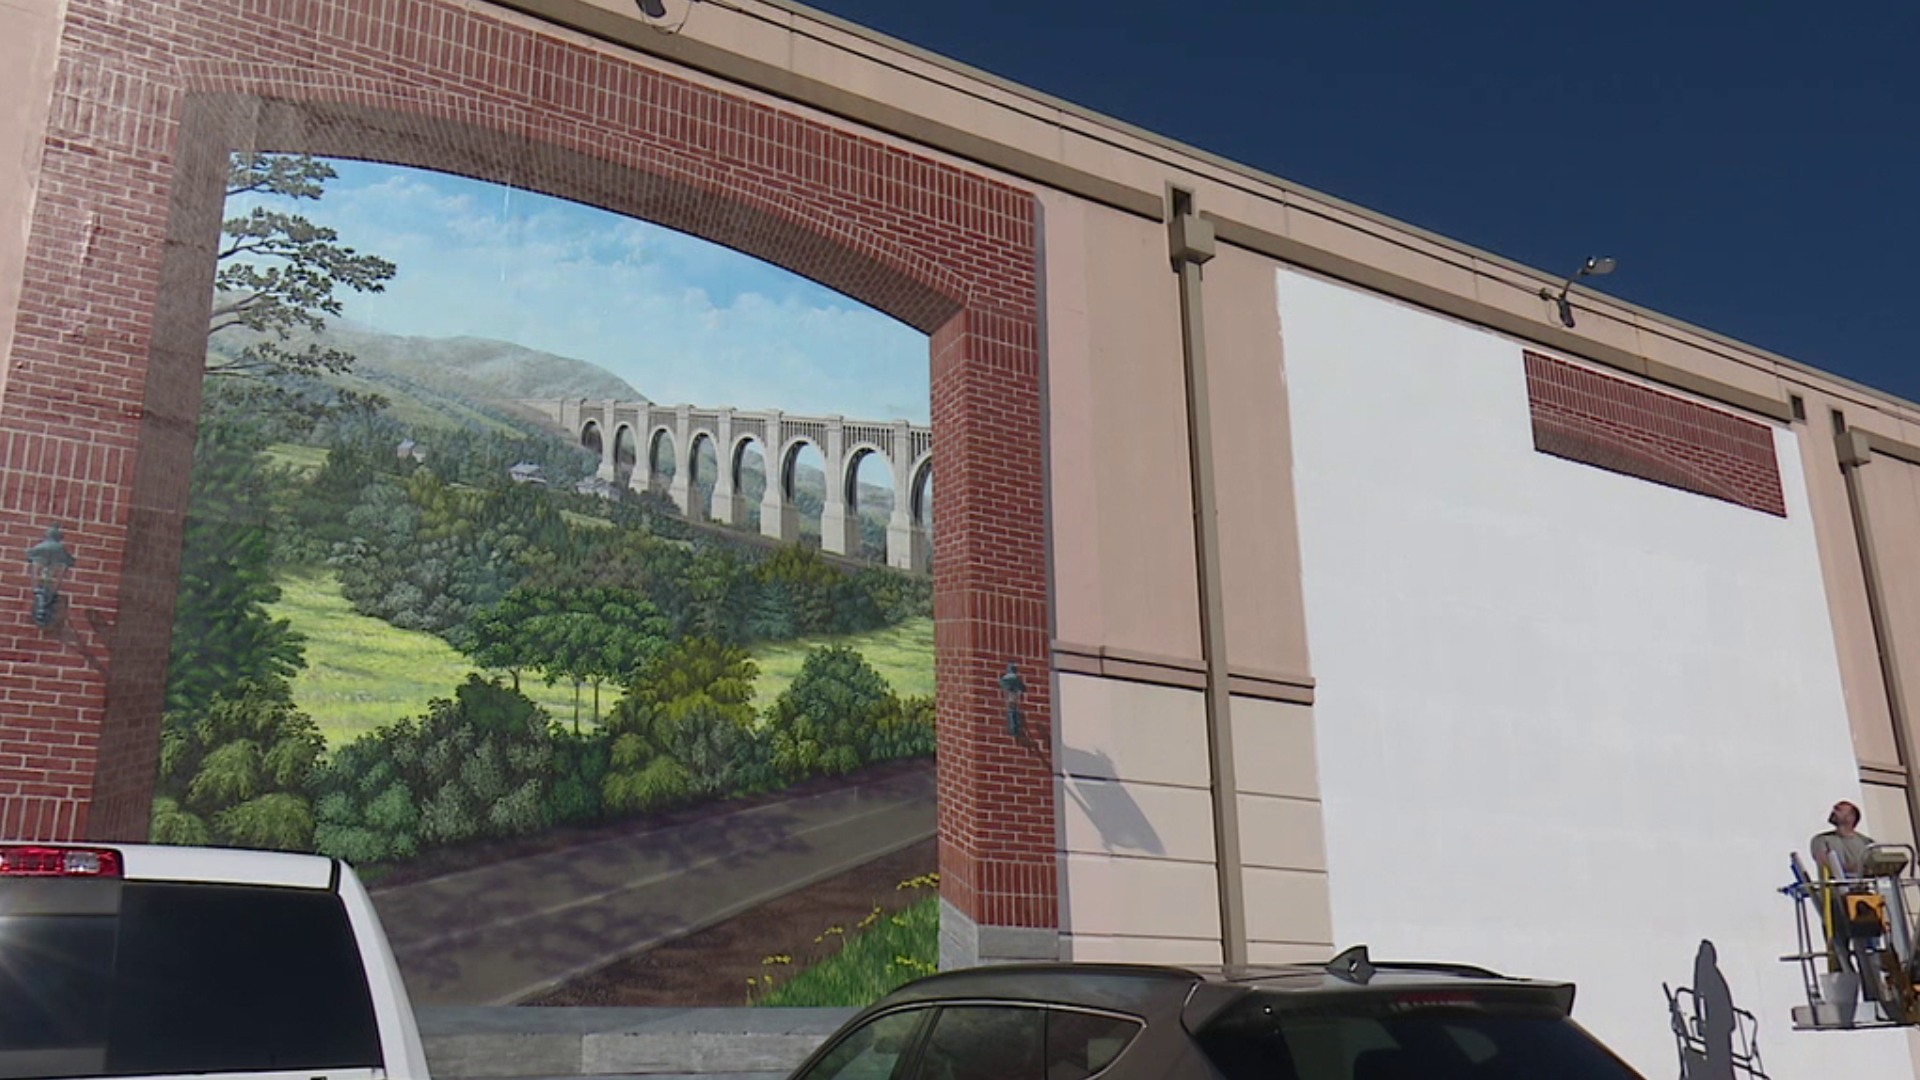 A piece of history is on display in Wyoming County. The second piece of a mural covering the Dietrich Theater in Tunkhannock was installed on Monday.